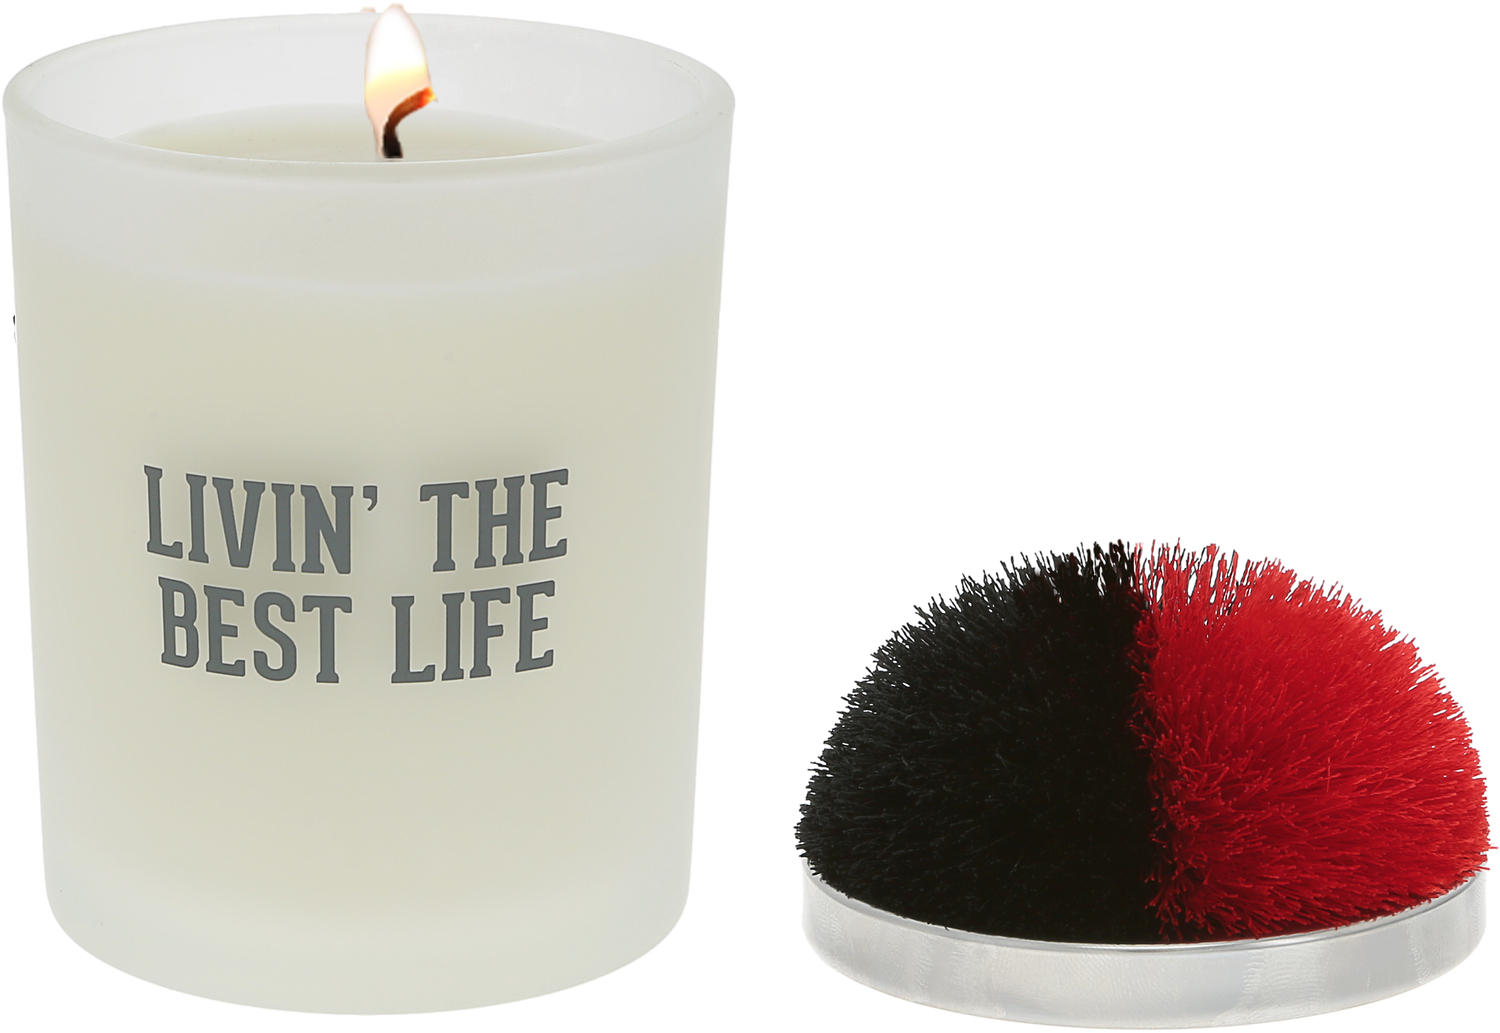 Best Life - Red & Black by Repre-Scent - Best Life - Red & Black - 5.5 oz - 100% Soy Wax Candle with Pom Pom Lid
Scent: Tranquility